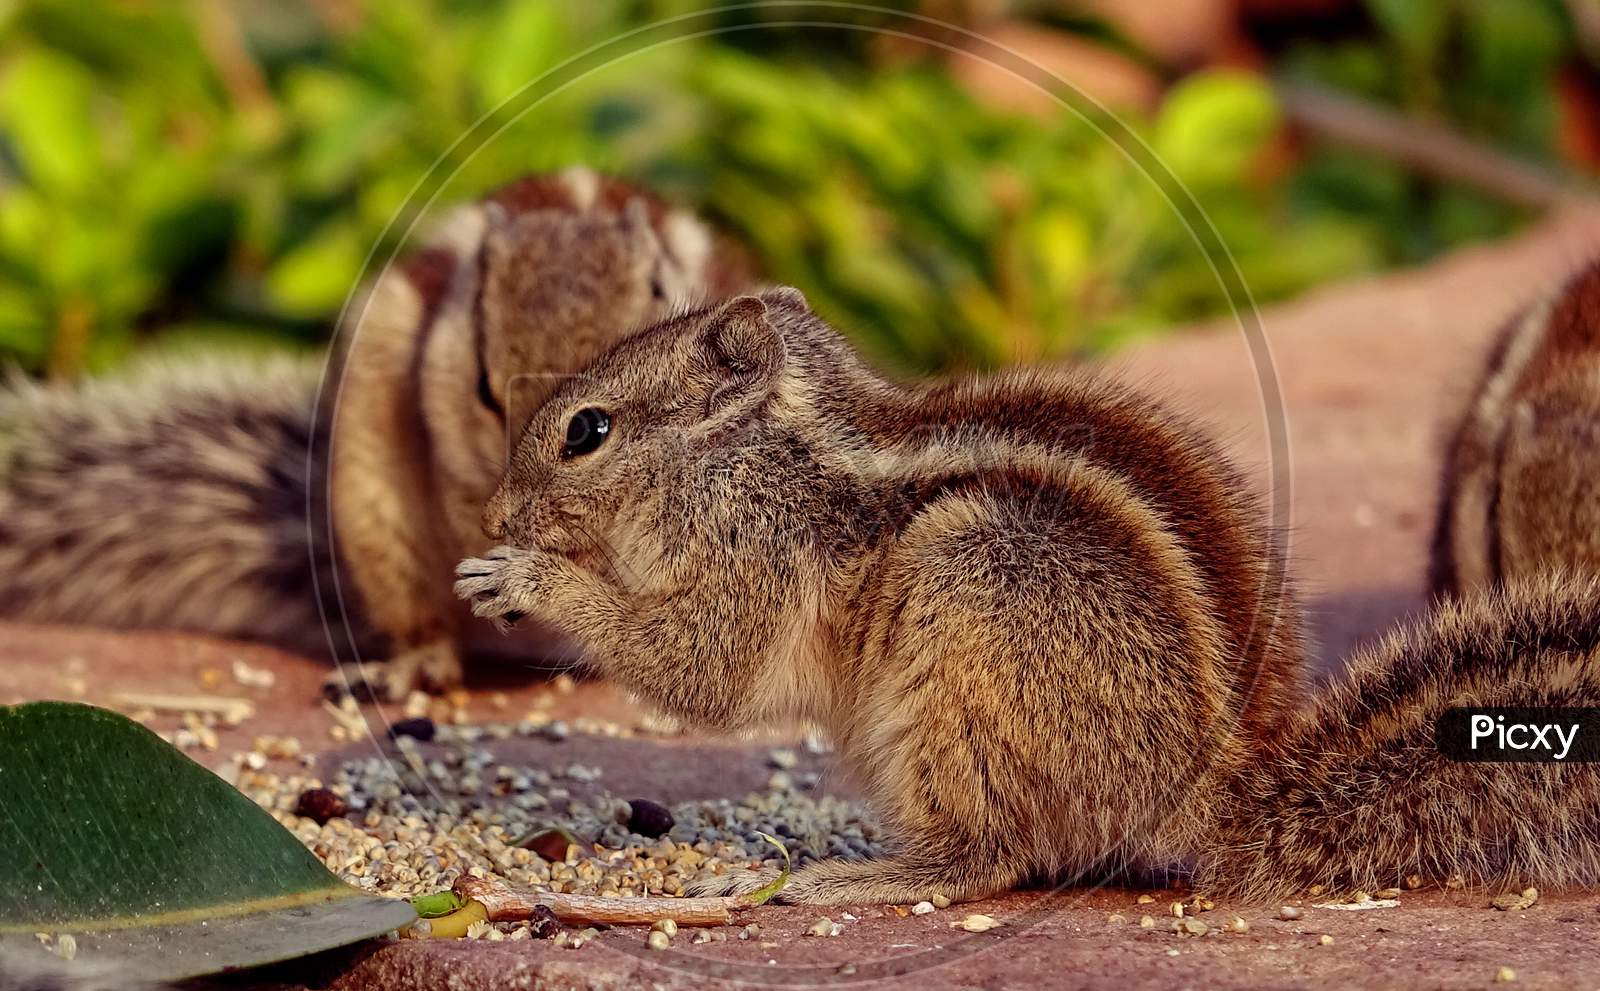 The Indian palm squirrels or three-striped palm squirrels eating grains